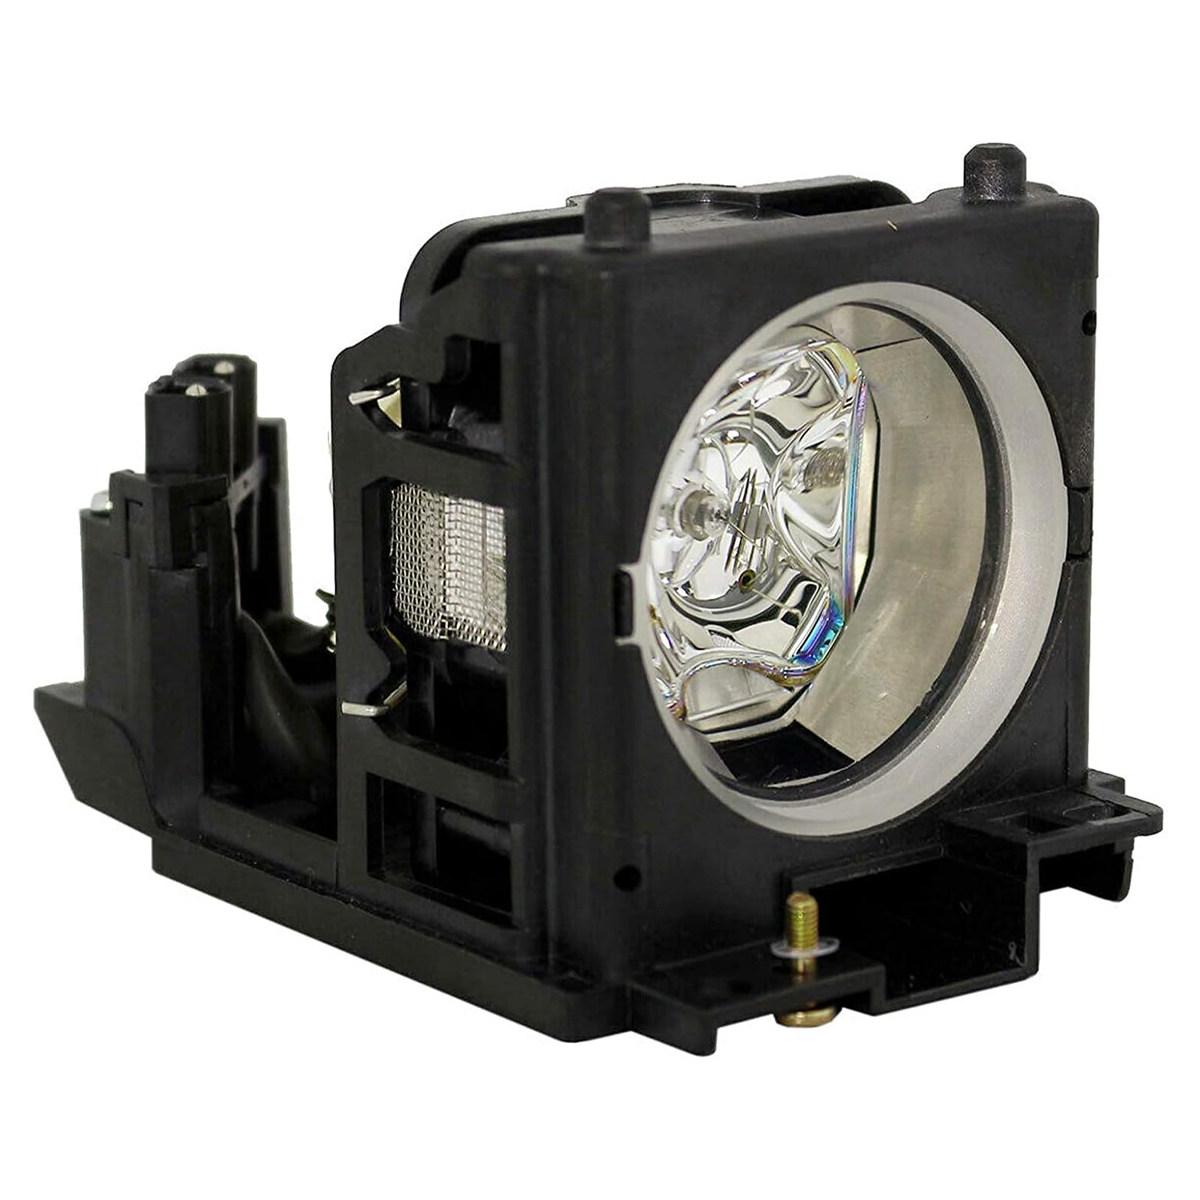 Replacement Projector lamp 78-6969-9797-8 For 3M X68 X75